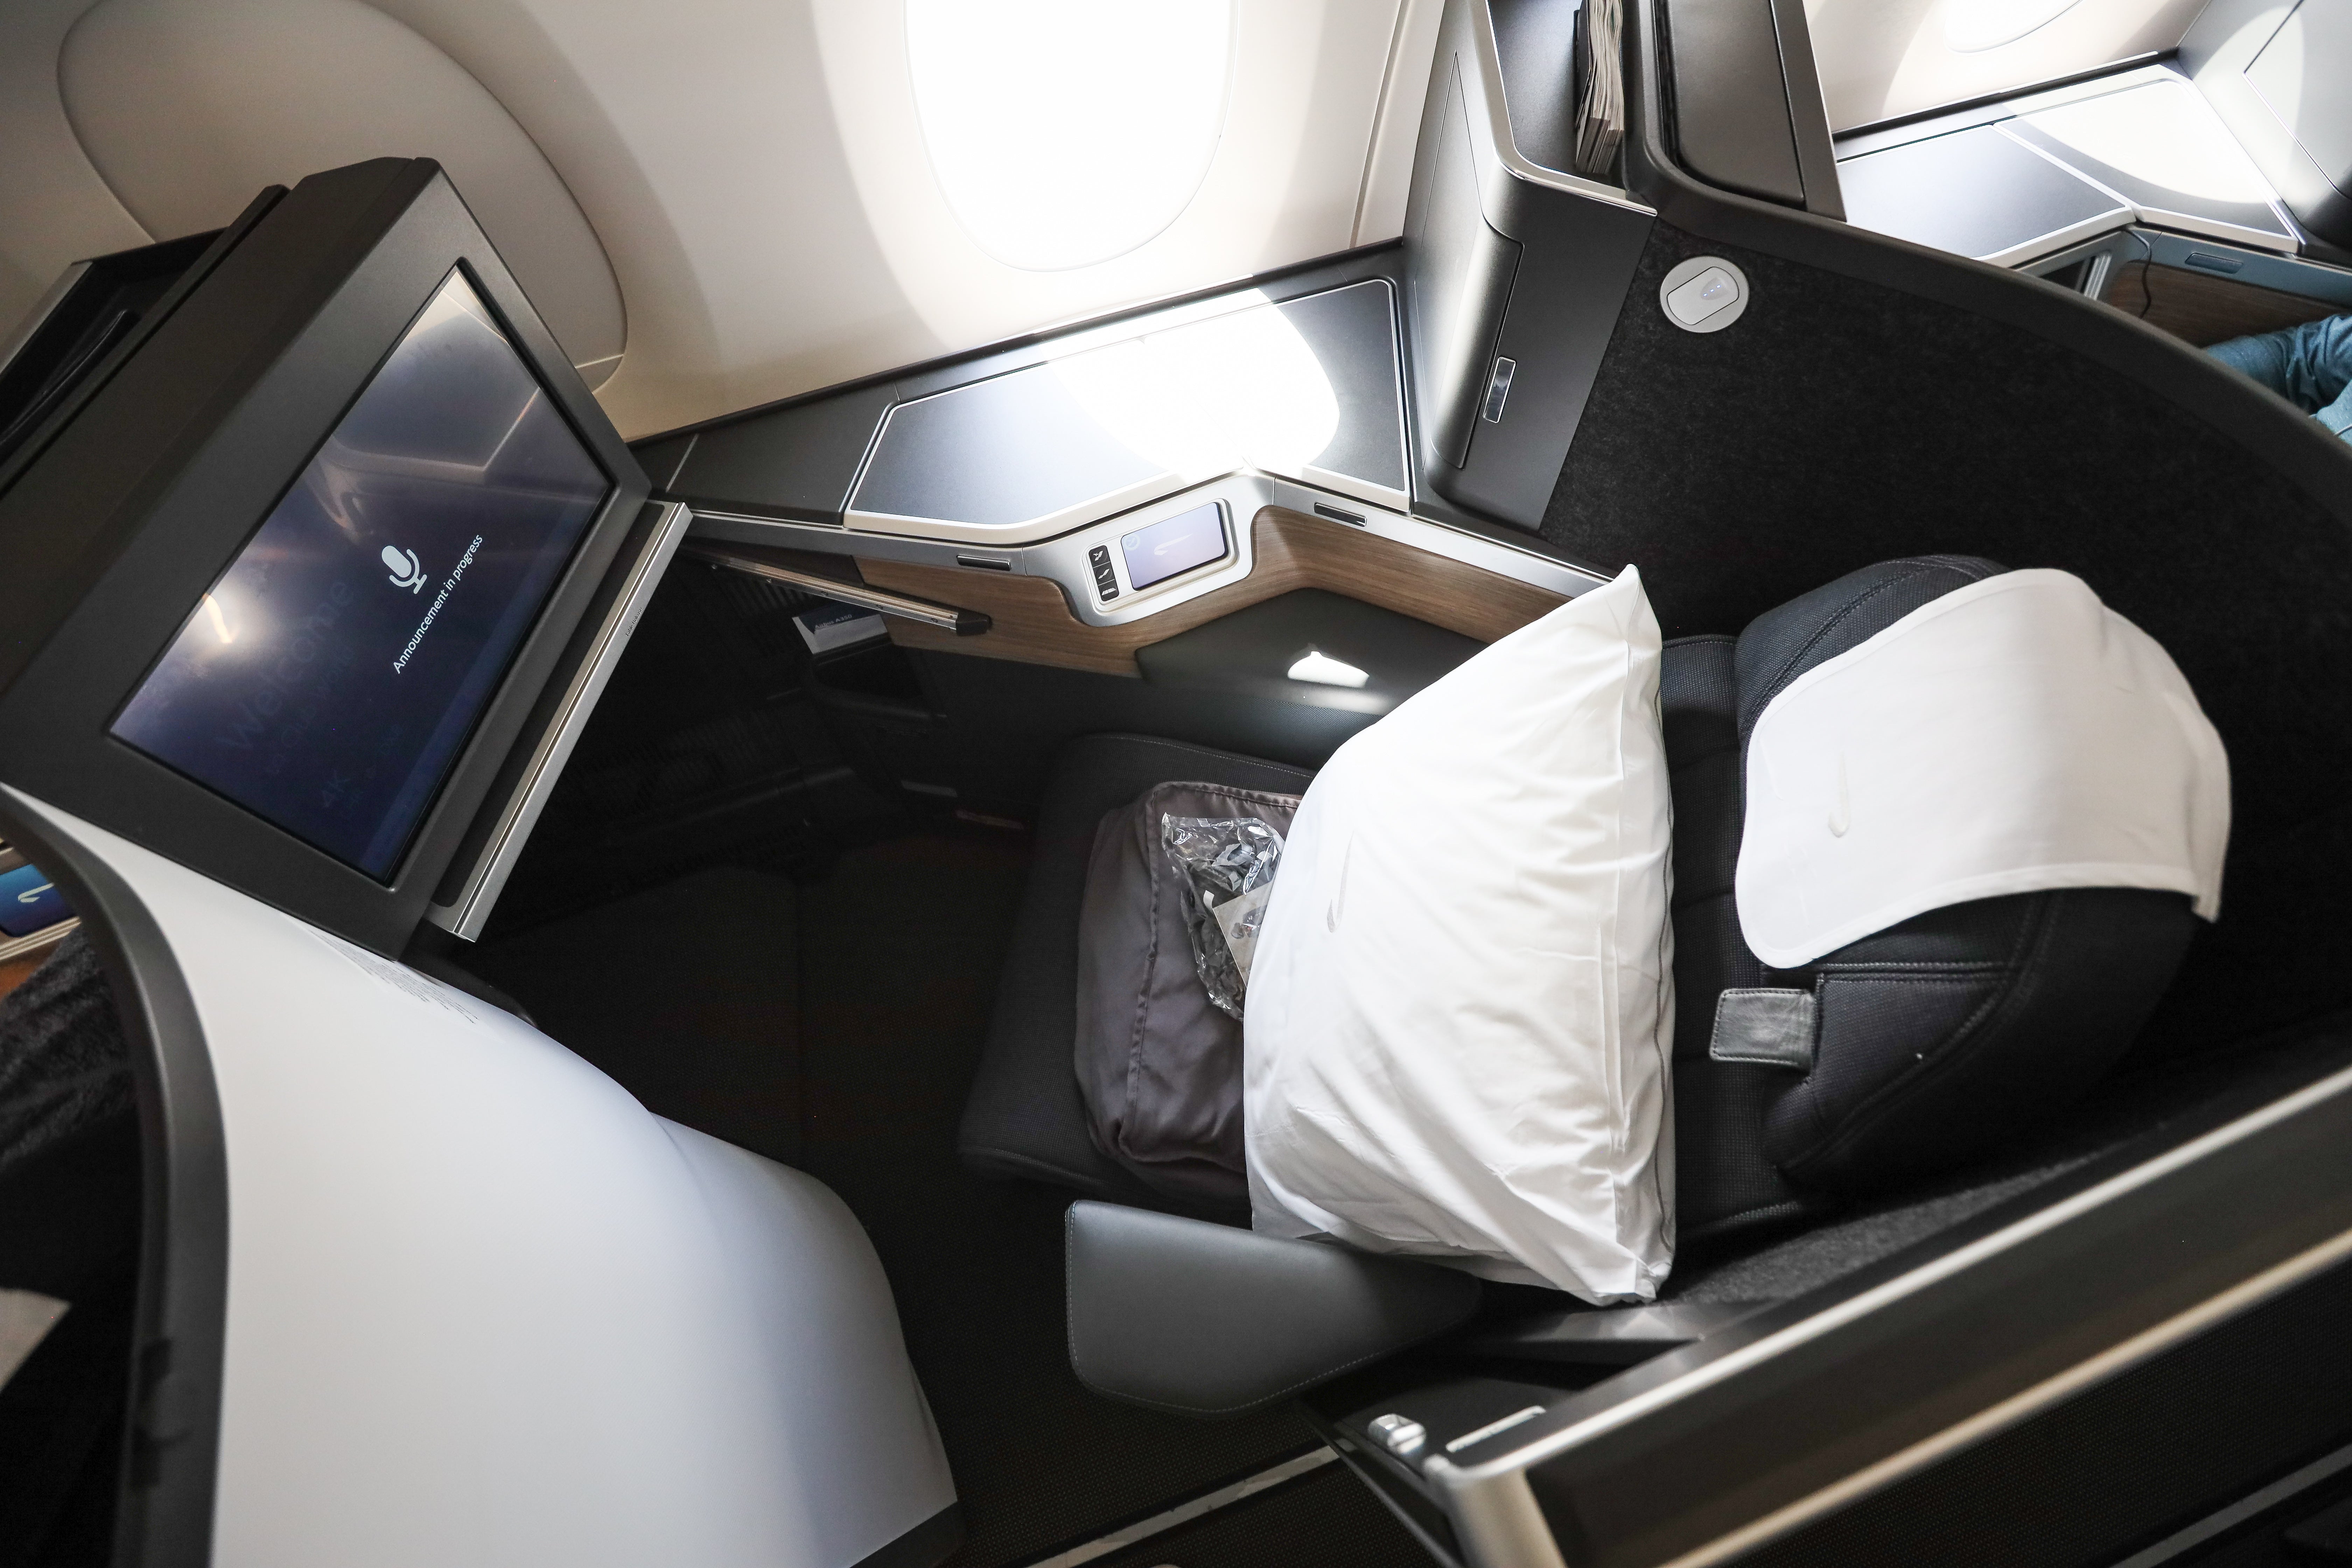 Review The Club Suite on British Airways' new A350 The Points Guy